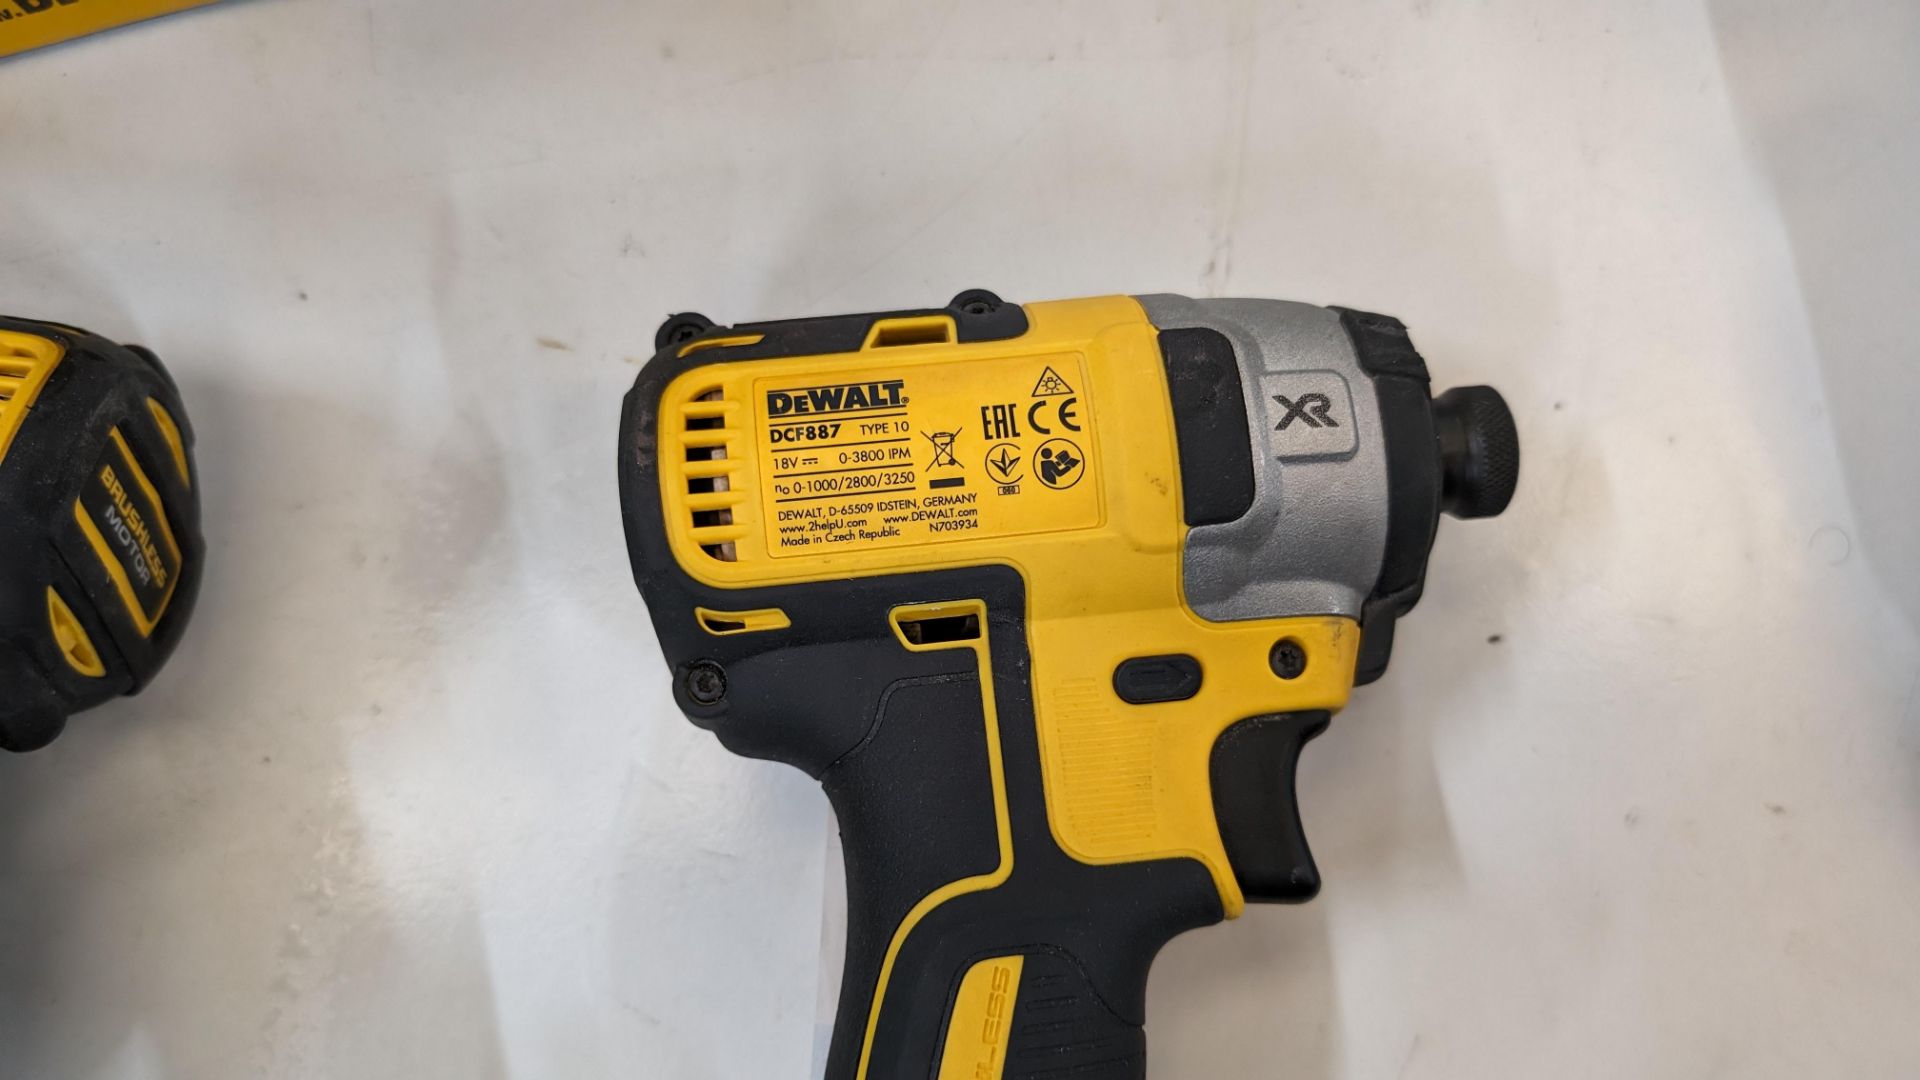 DeWalt DCF887 cordless driver - no battery or charger - Image 6 of 6